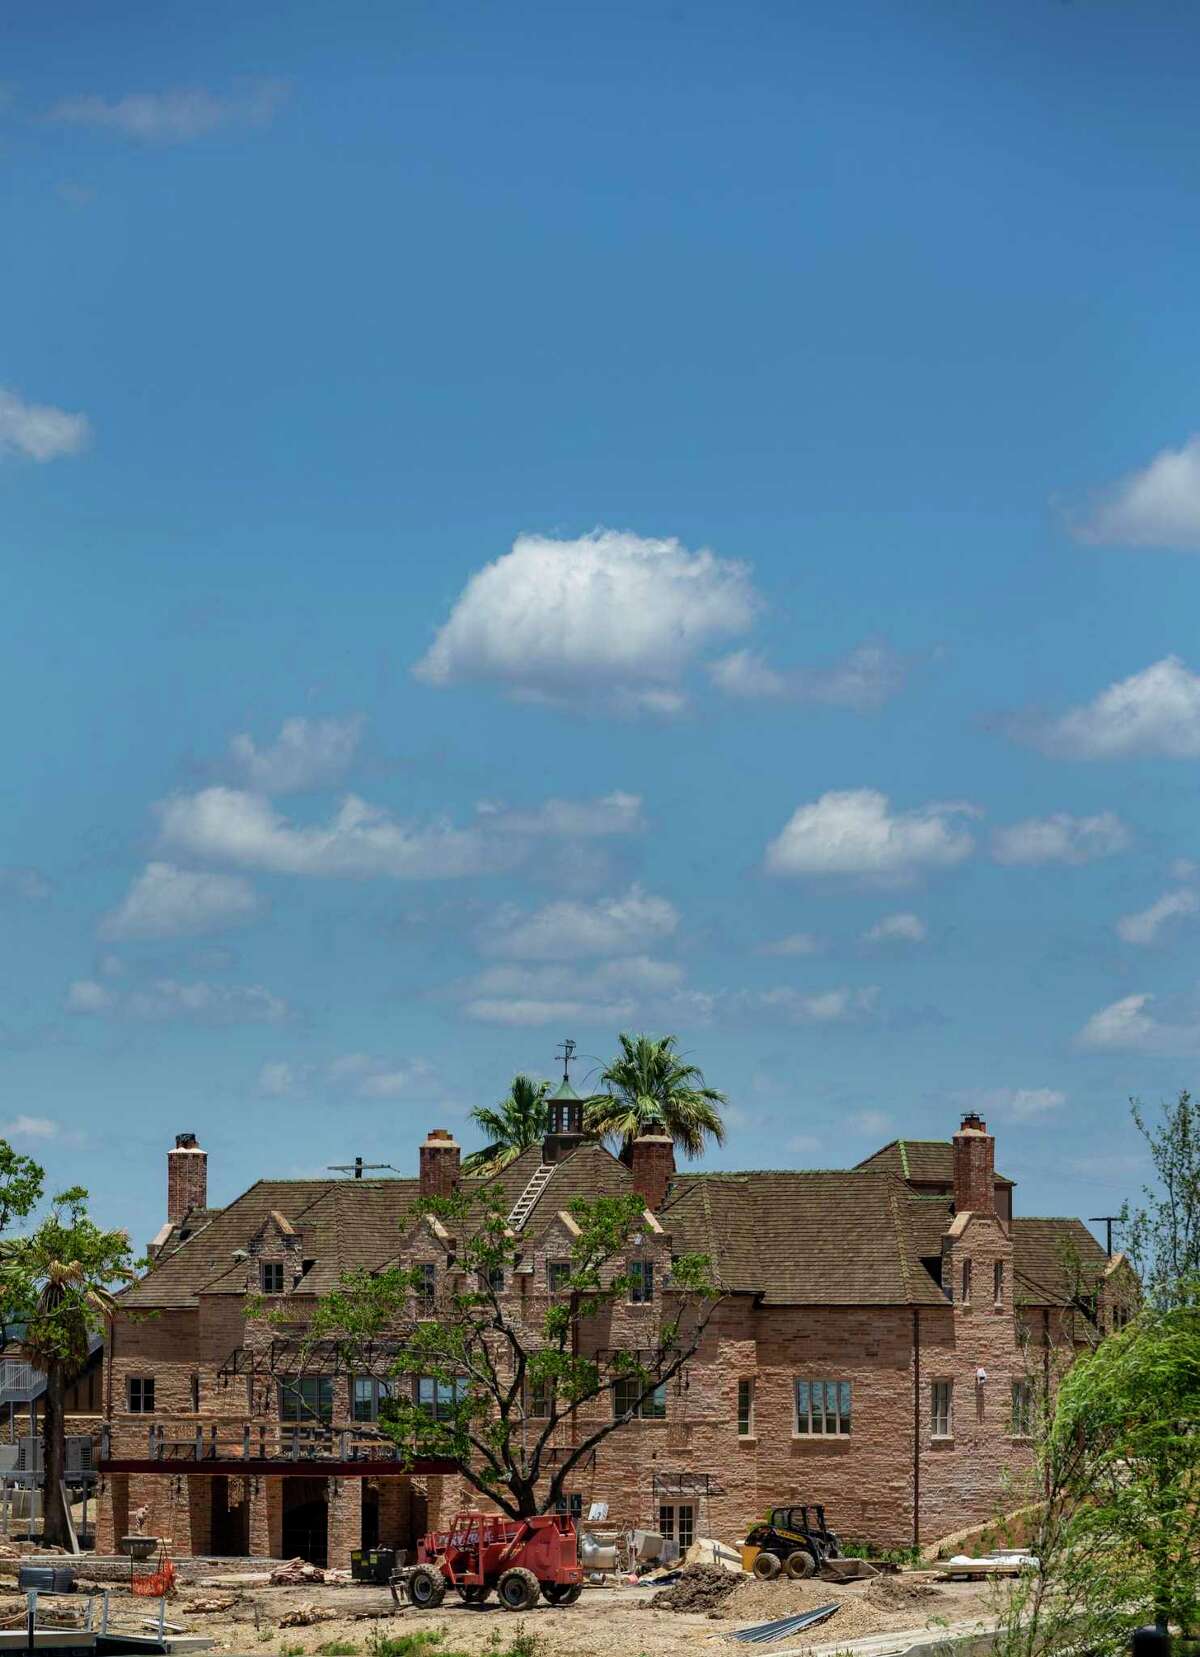 The Red Berry Mansion is seen in a May 13, 2020 photo. The mansion, now owned by The RK Group, was built in 1951 by Texas representative and senator Virgil Edward “Red” Berry in 1951. The RK Group is renovating the original mansion to lease out as an event center as part of a $60 million redevelopment of the Red Berry Estate.